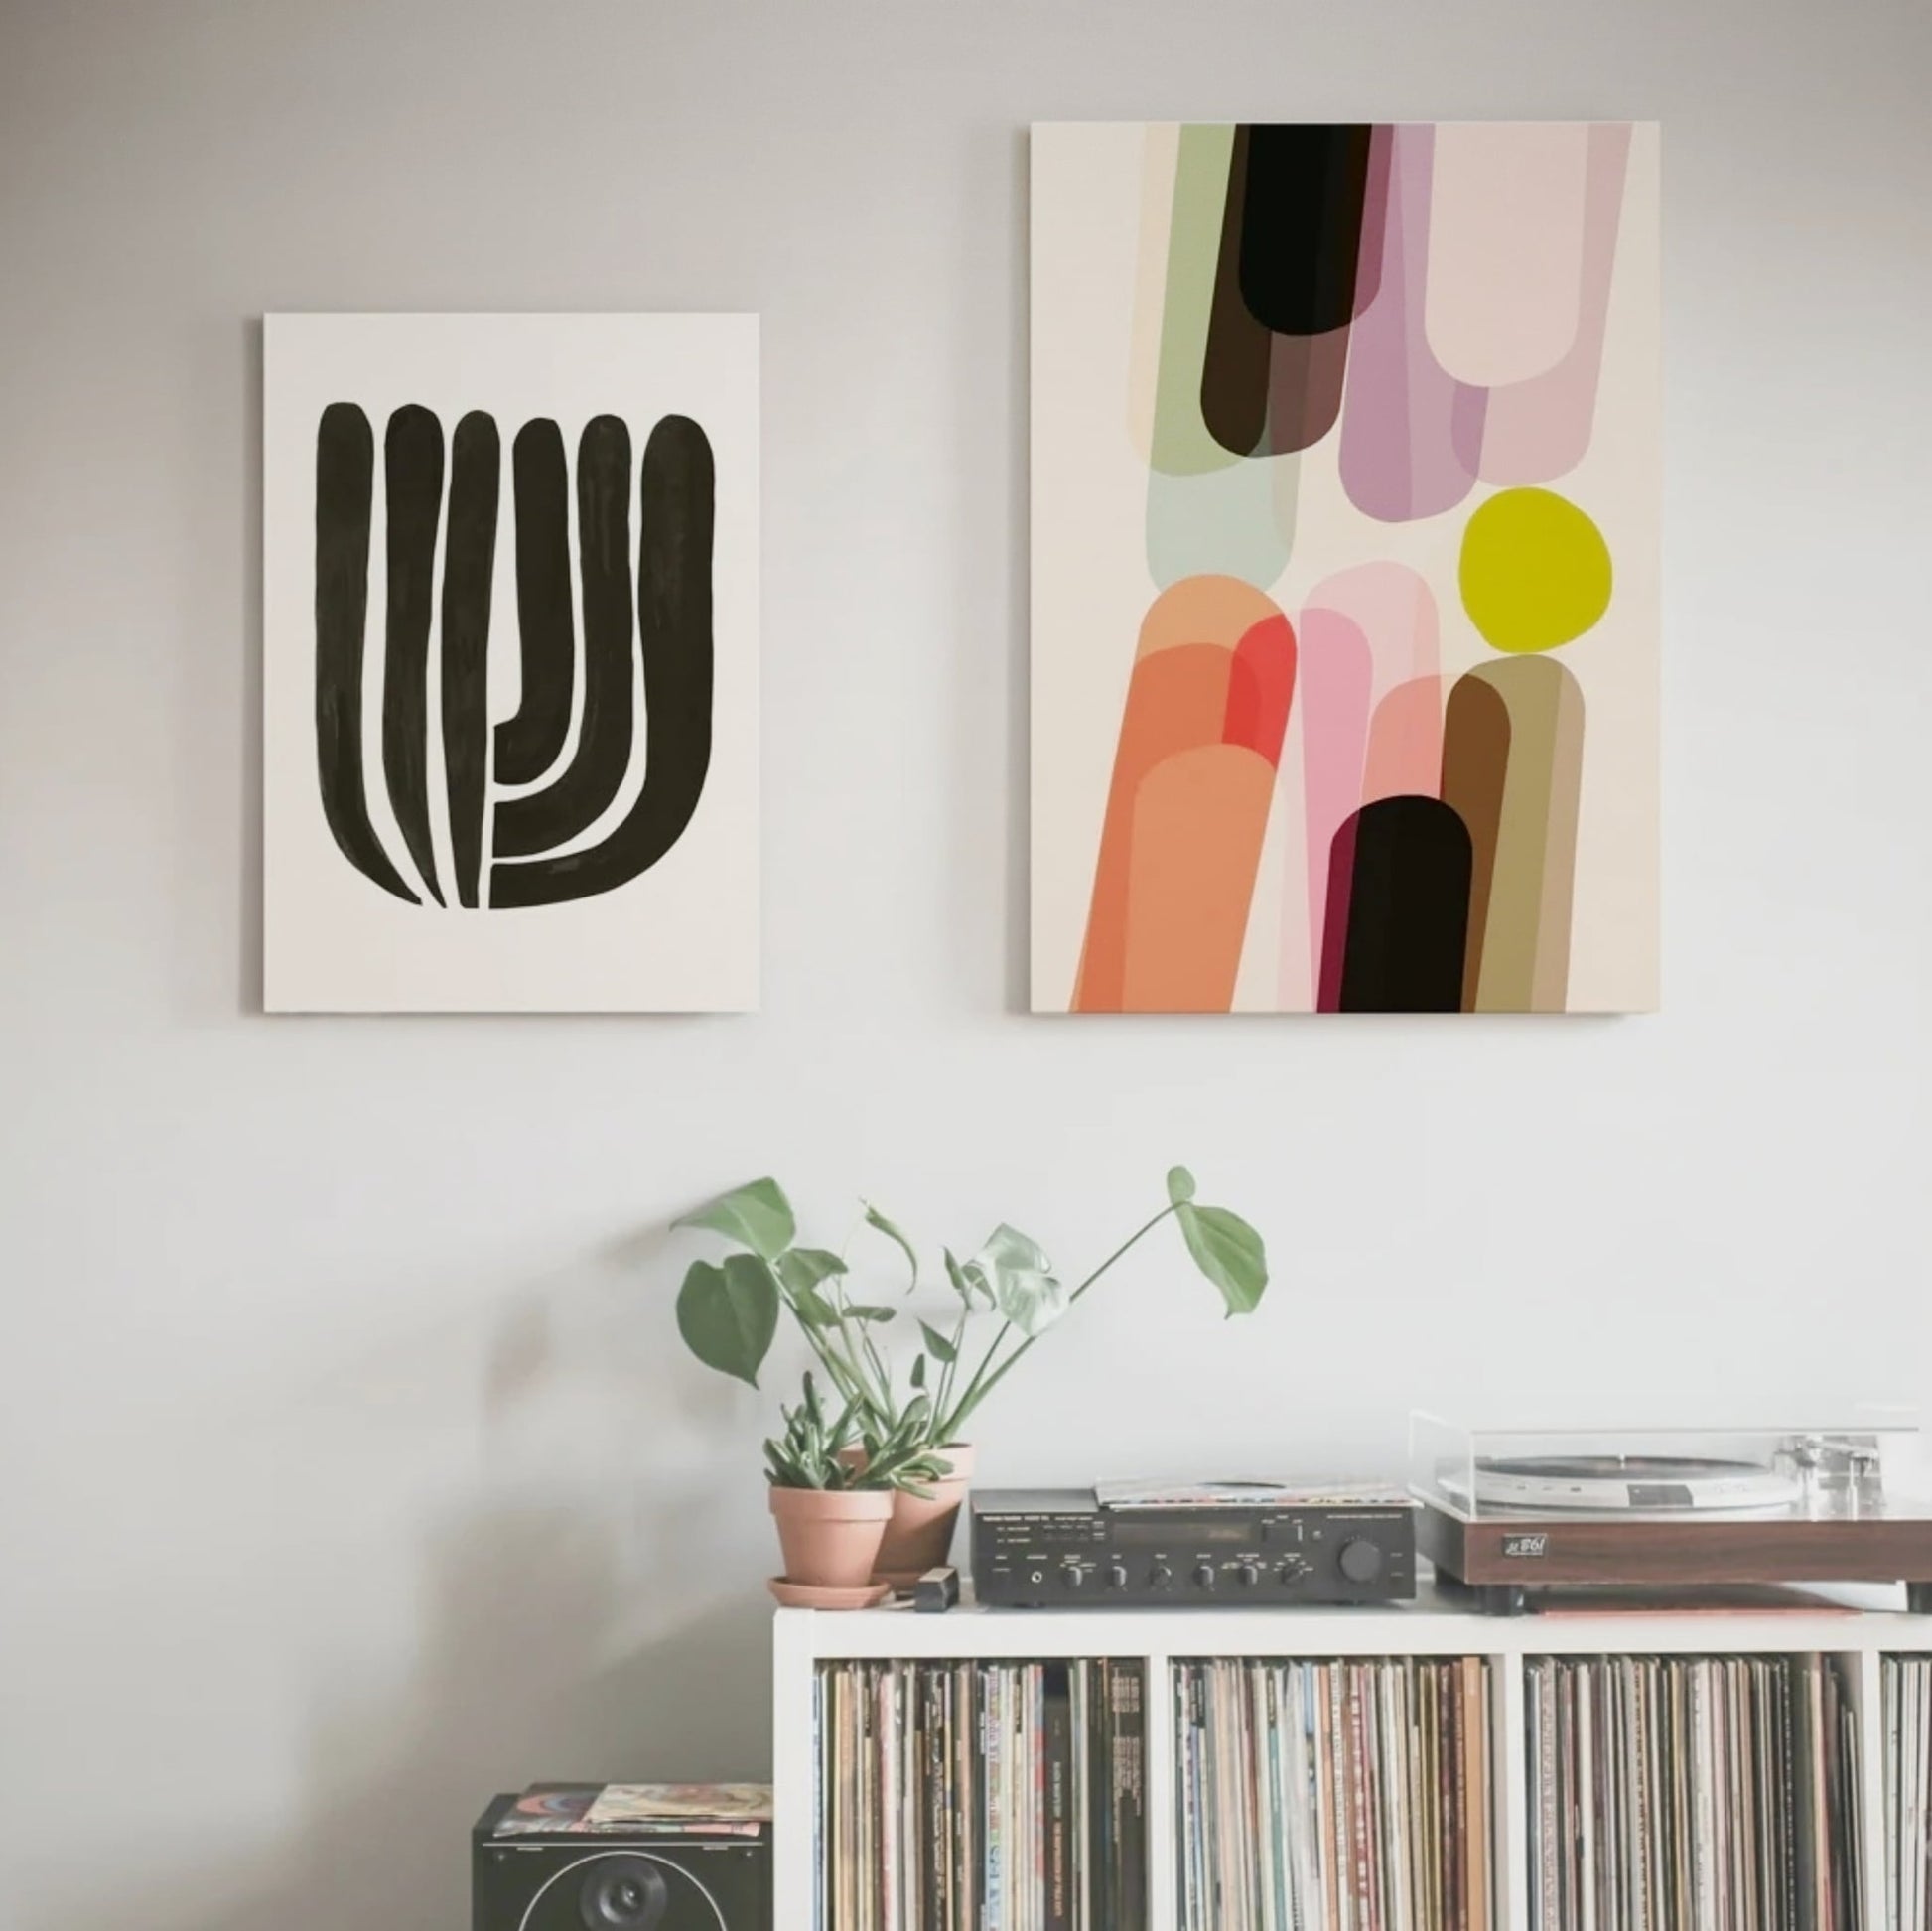 Monochrome graphic print and a colourful print.abstract hanging together on wall.